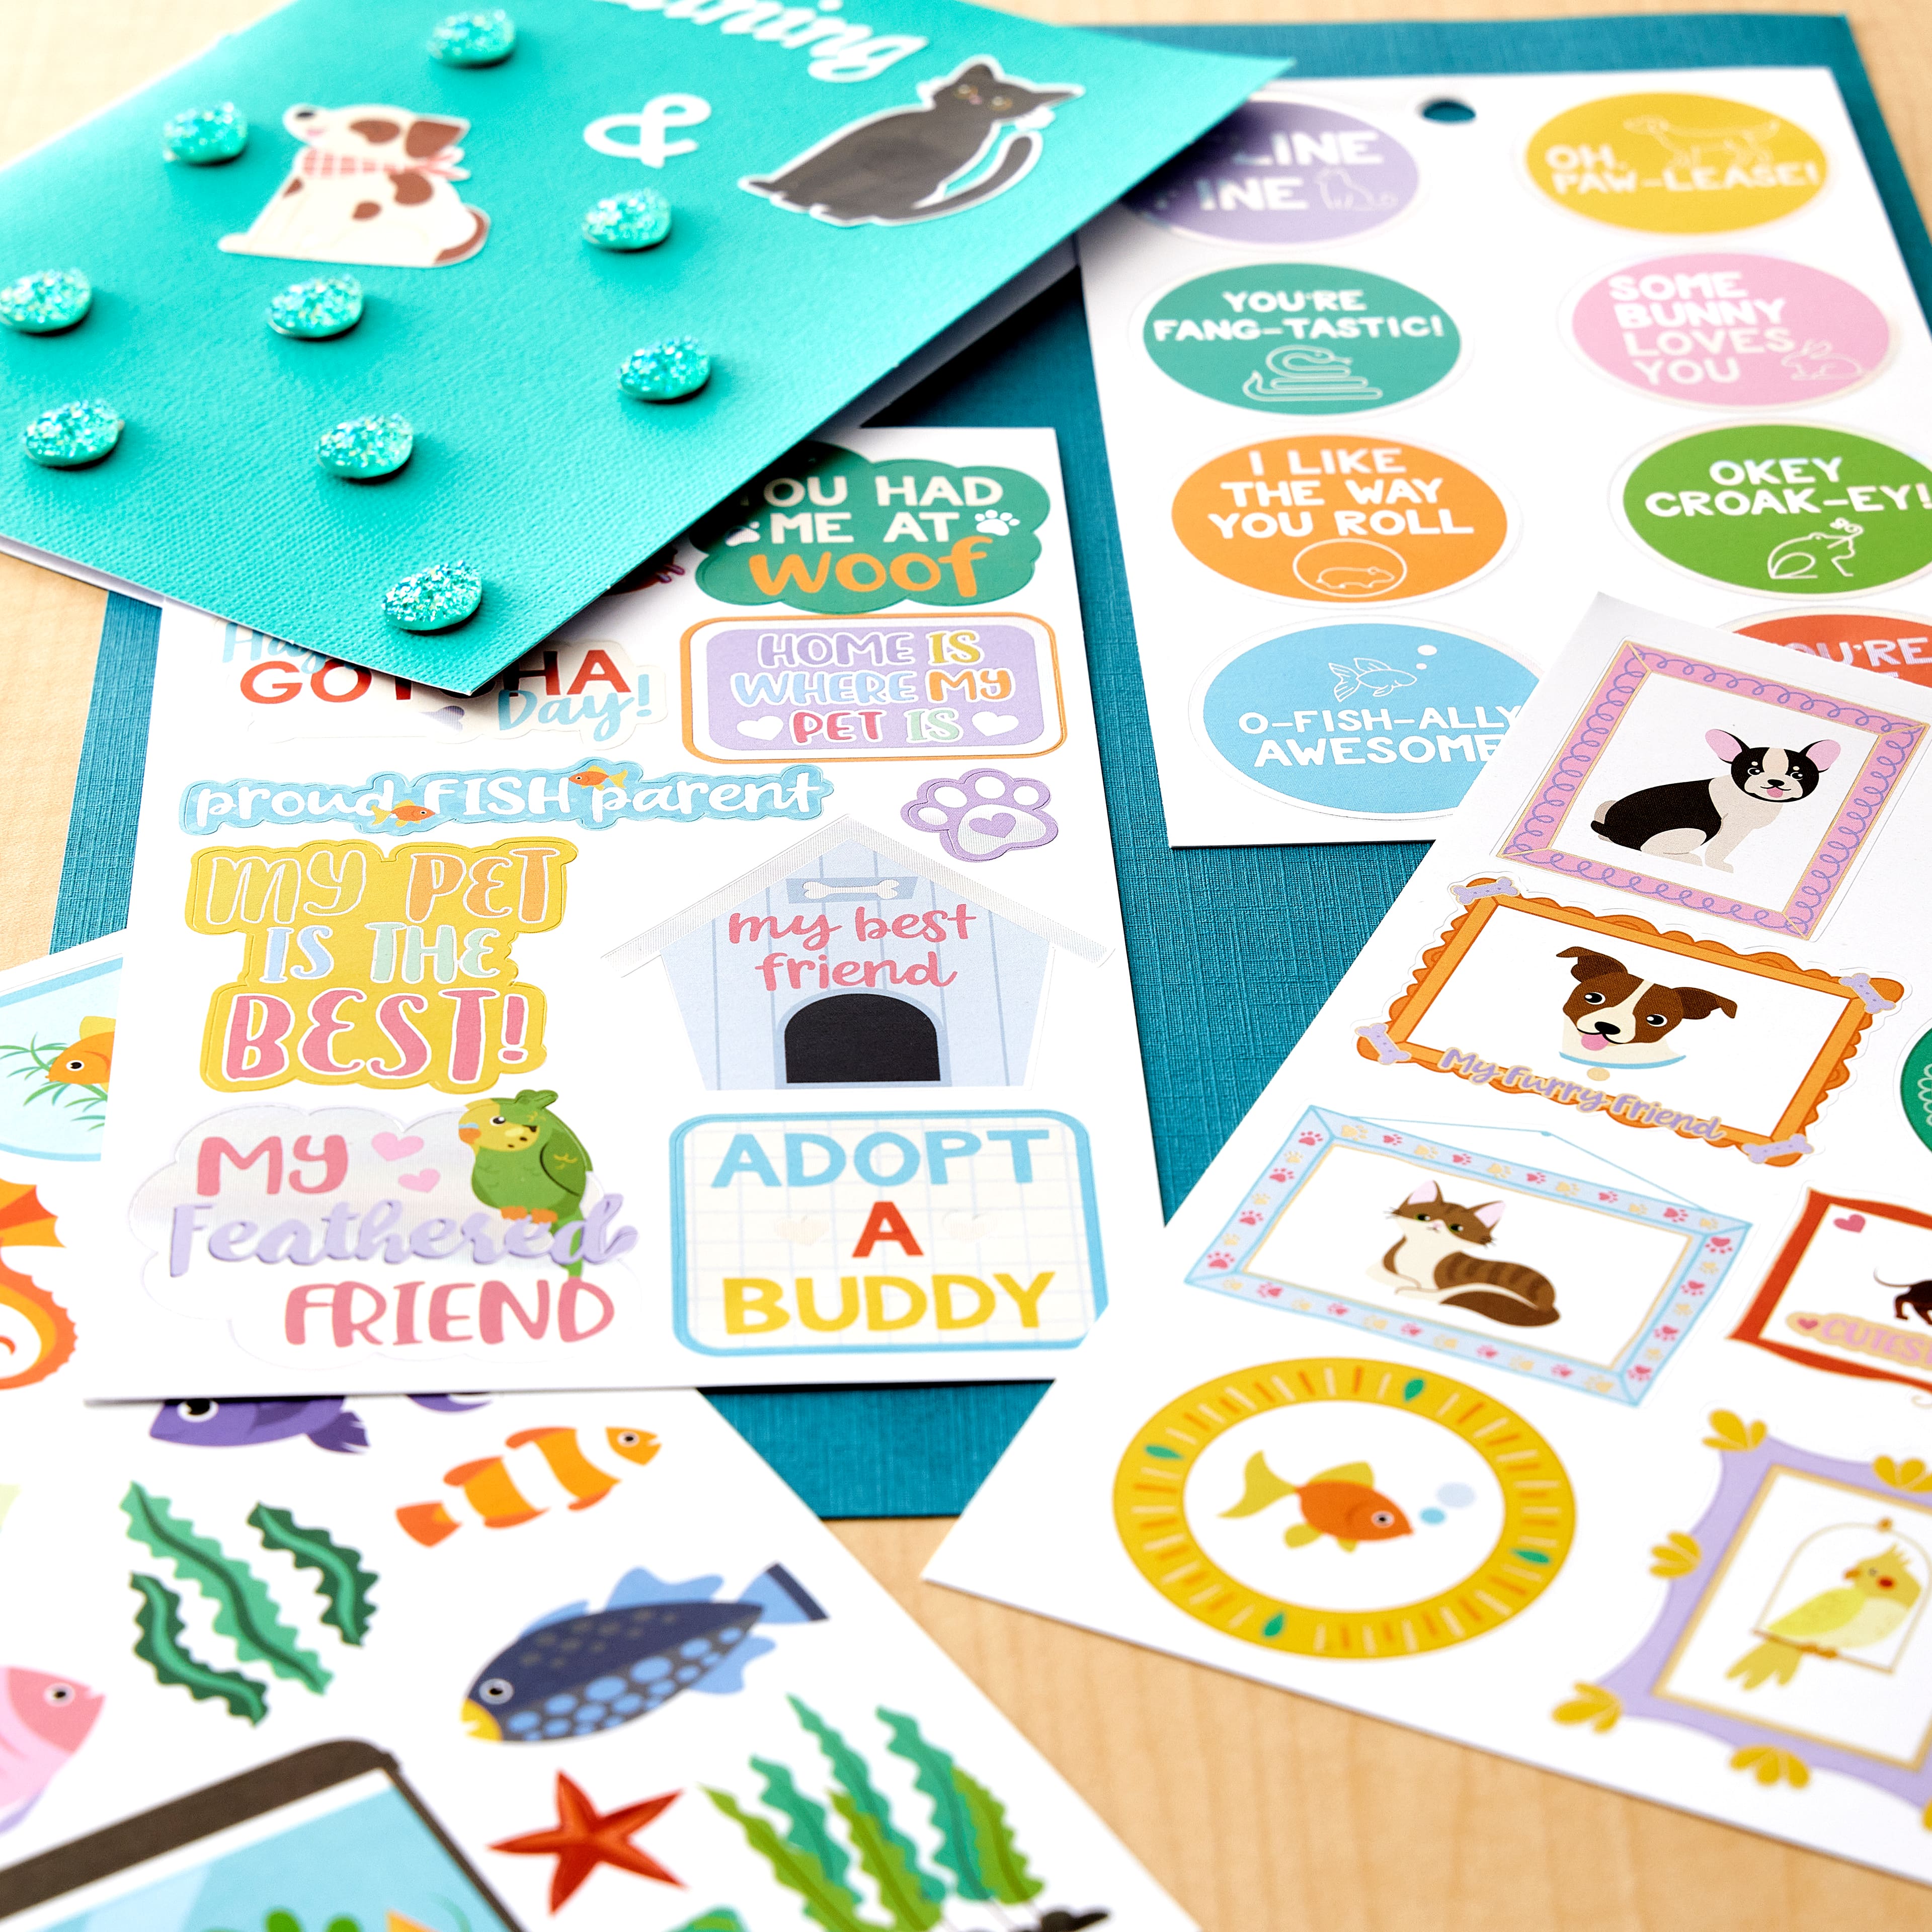 Best Pet Ever Stickers by Recollections&#x2122;